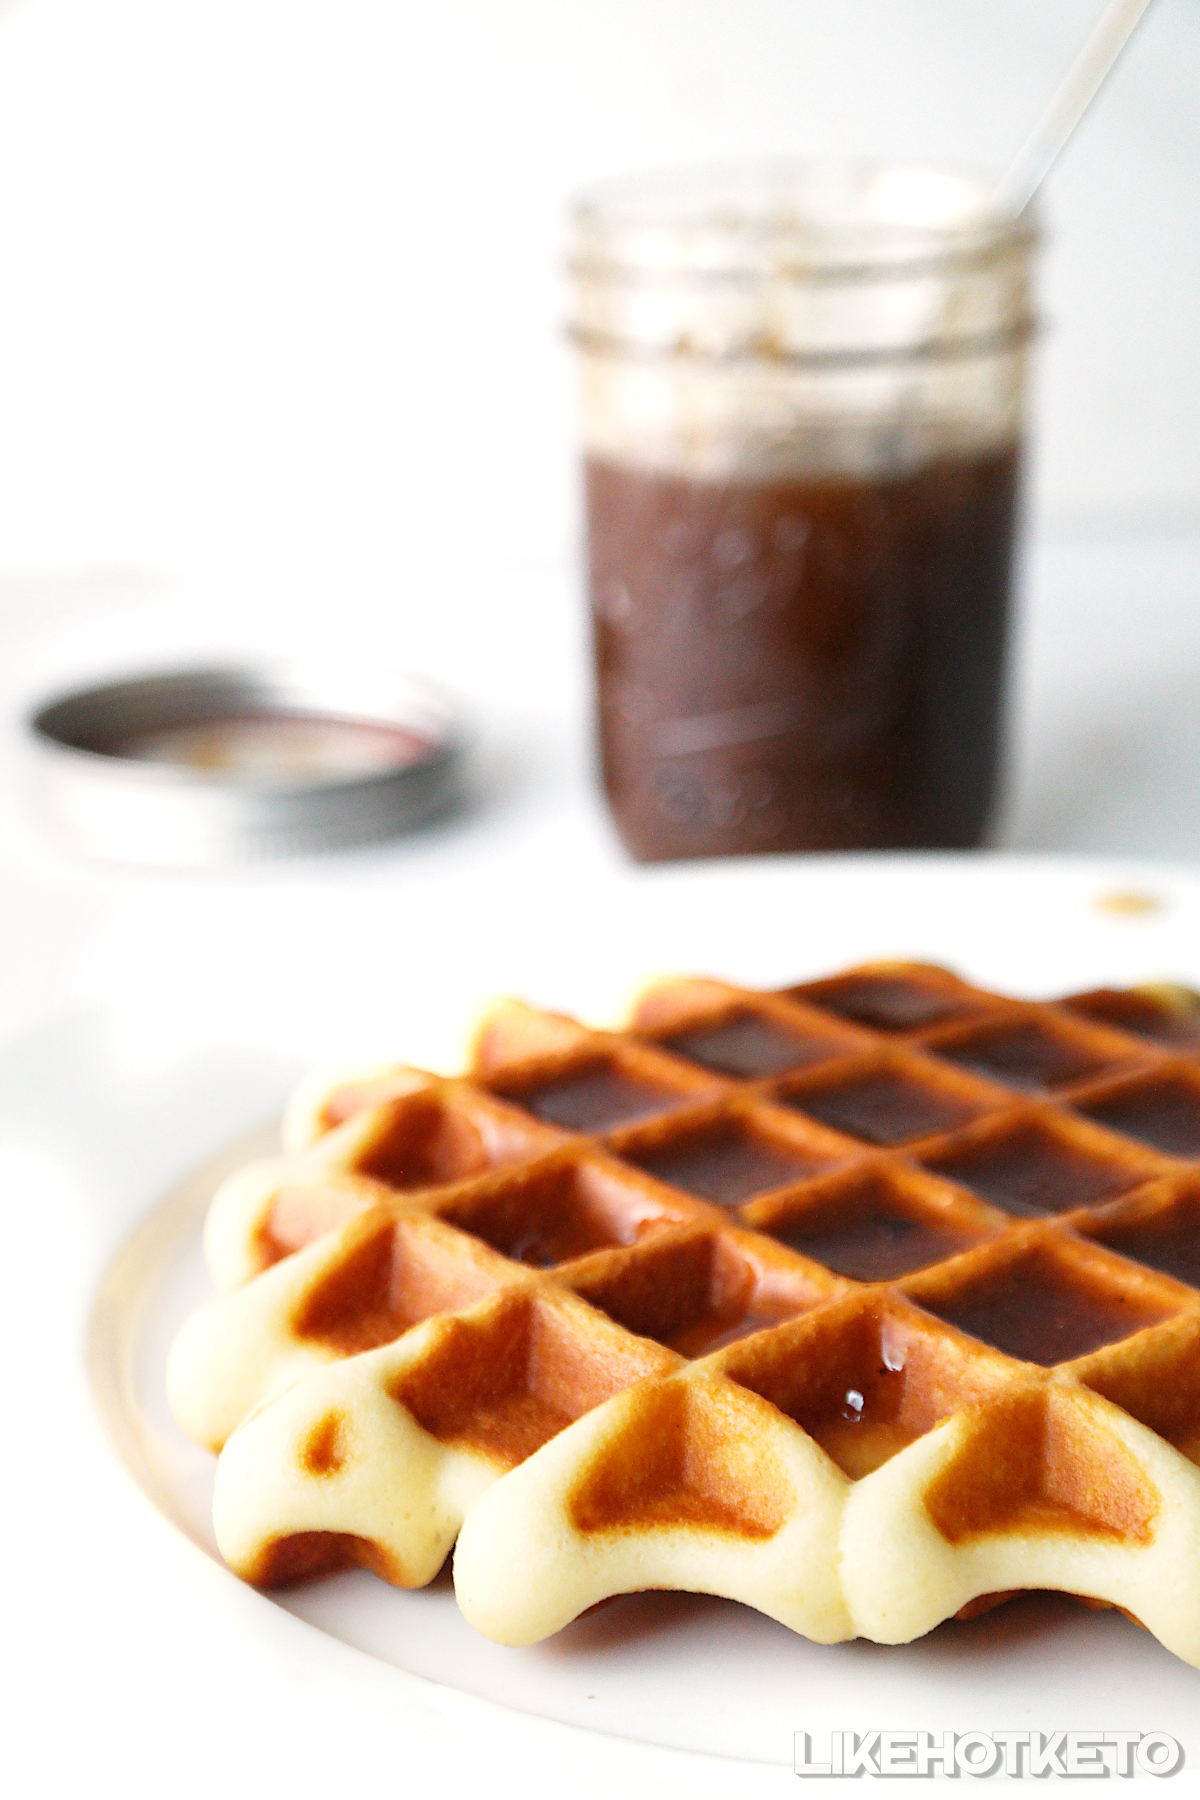 A big keto waffle topped with sugar-free maple syrup.